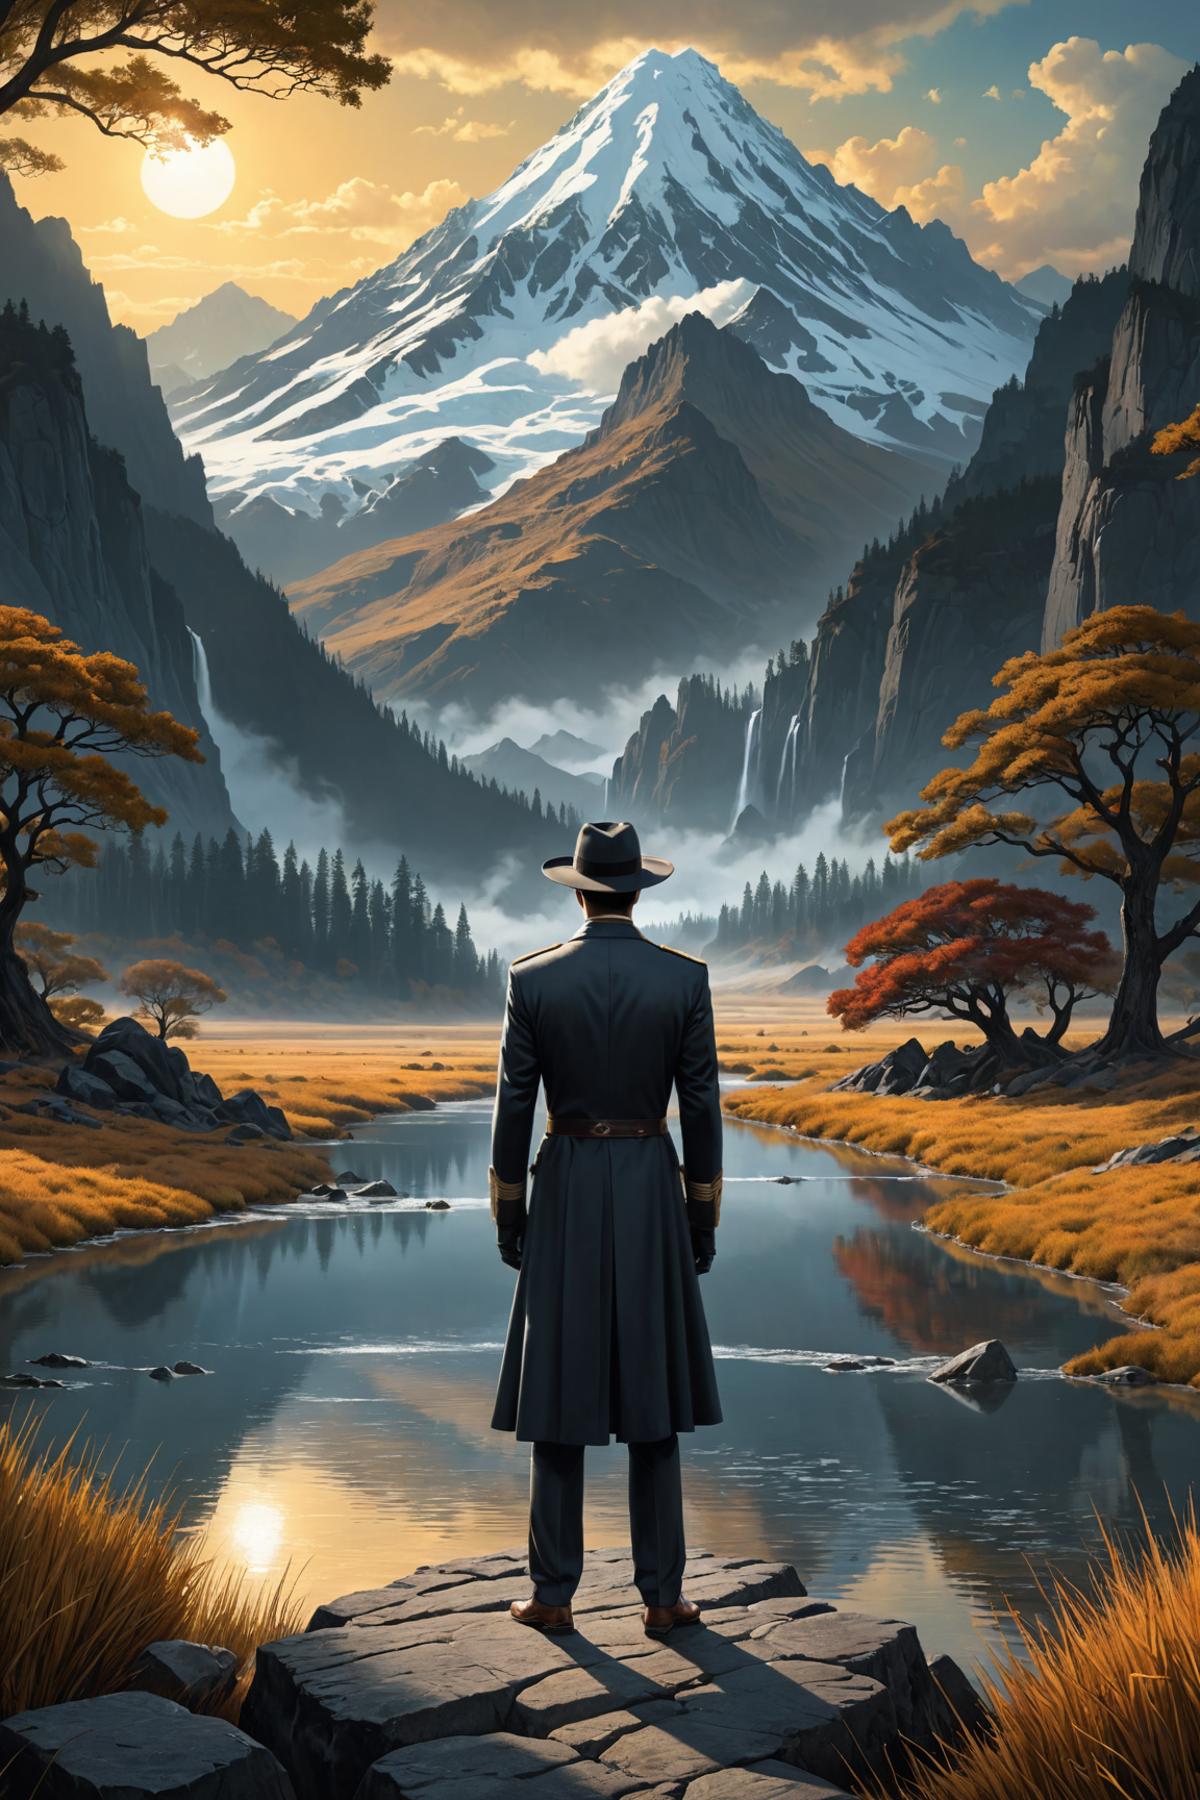 A Man in a Long Coat Standing by a River in a Mountainous Landscape